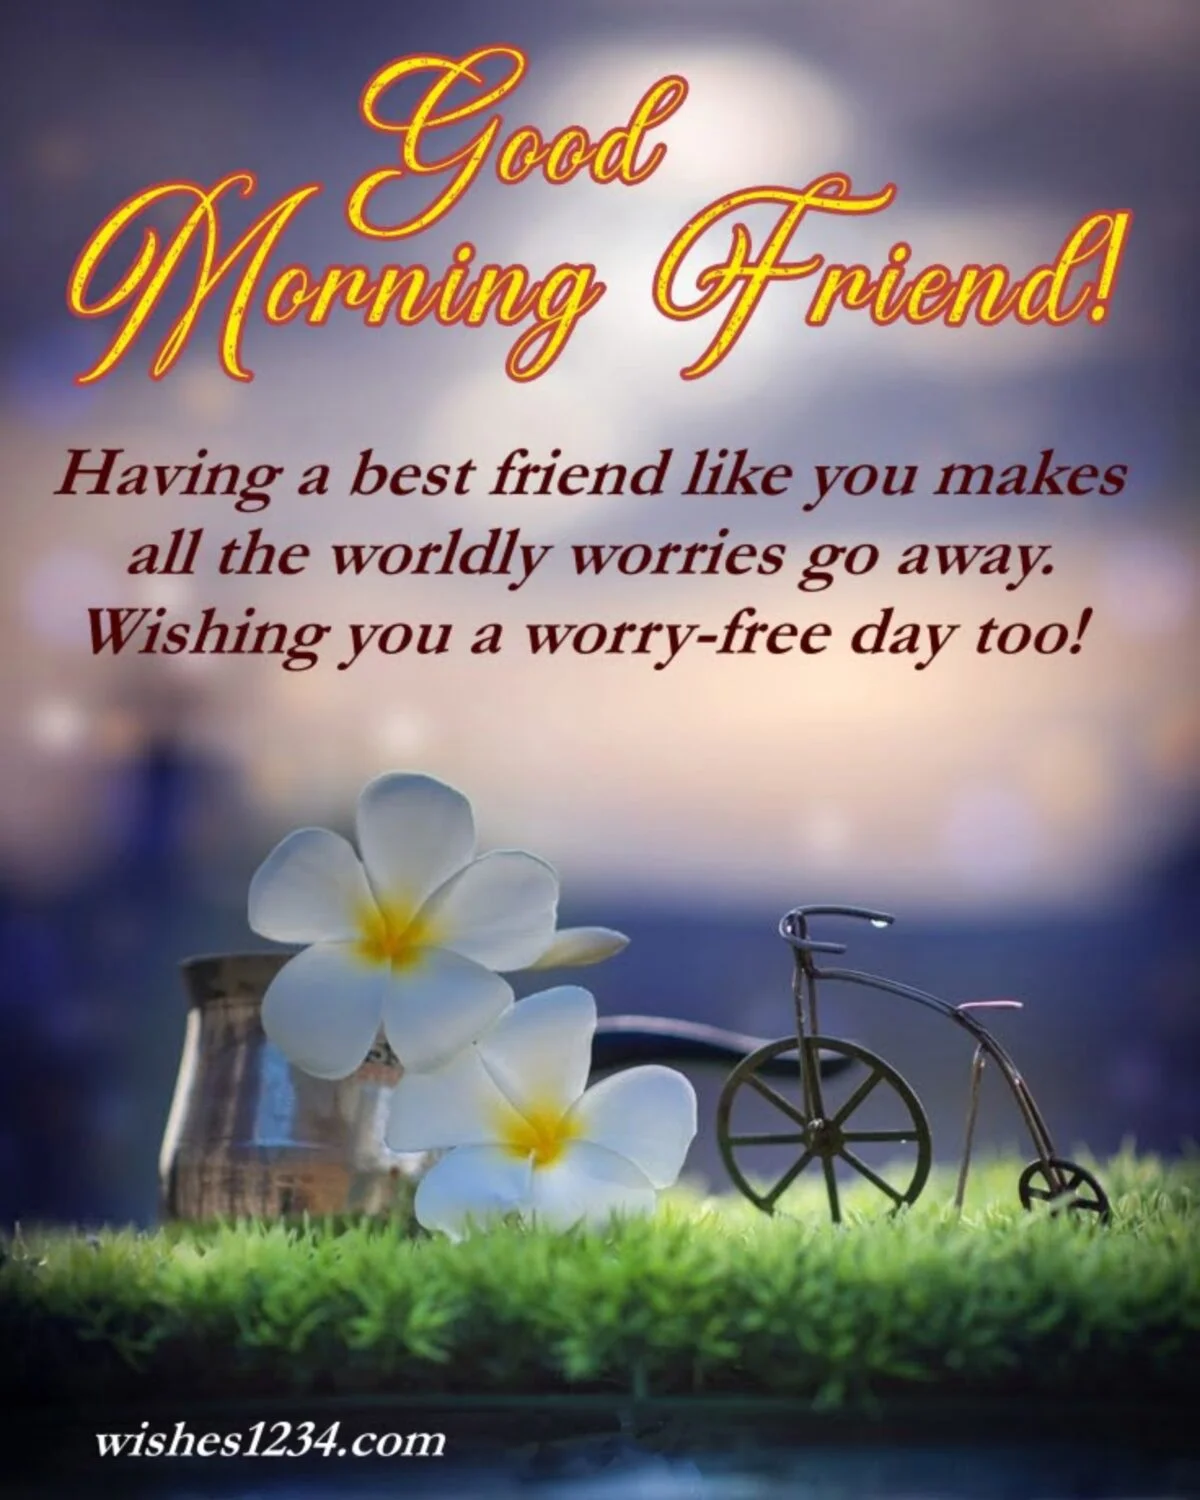 Two champa flowers with miniature bicycle, Good Morning Message | Good Morning Images.